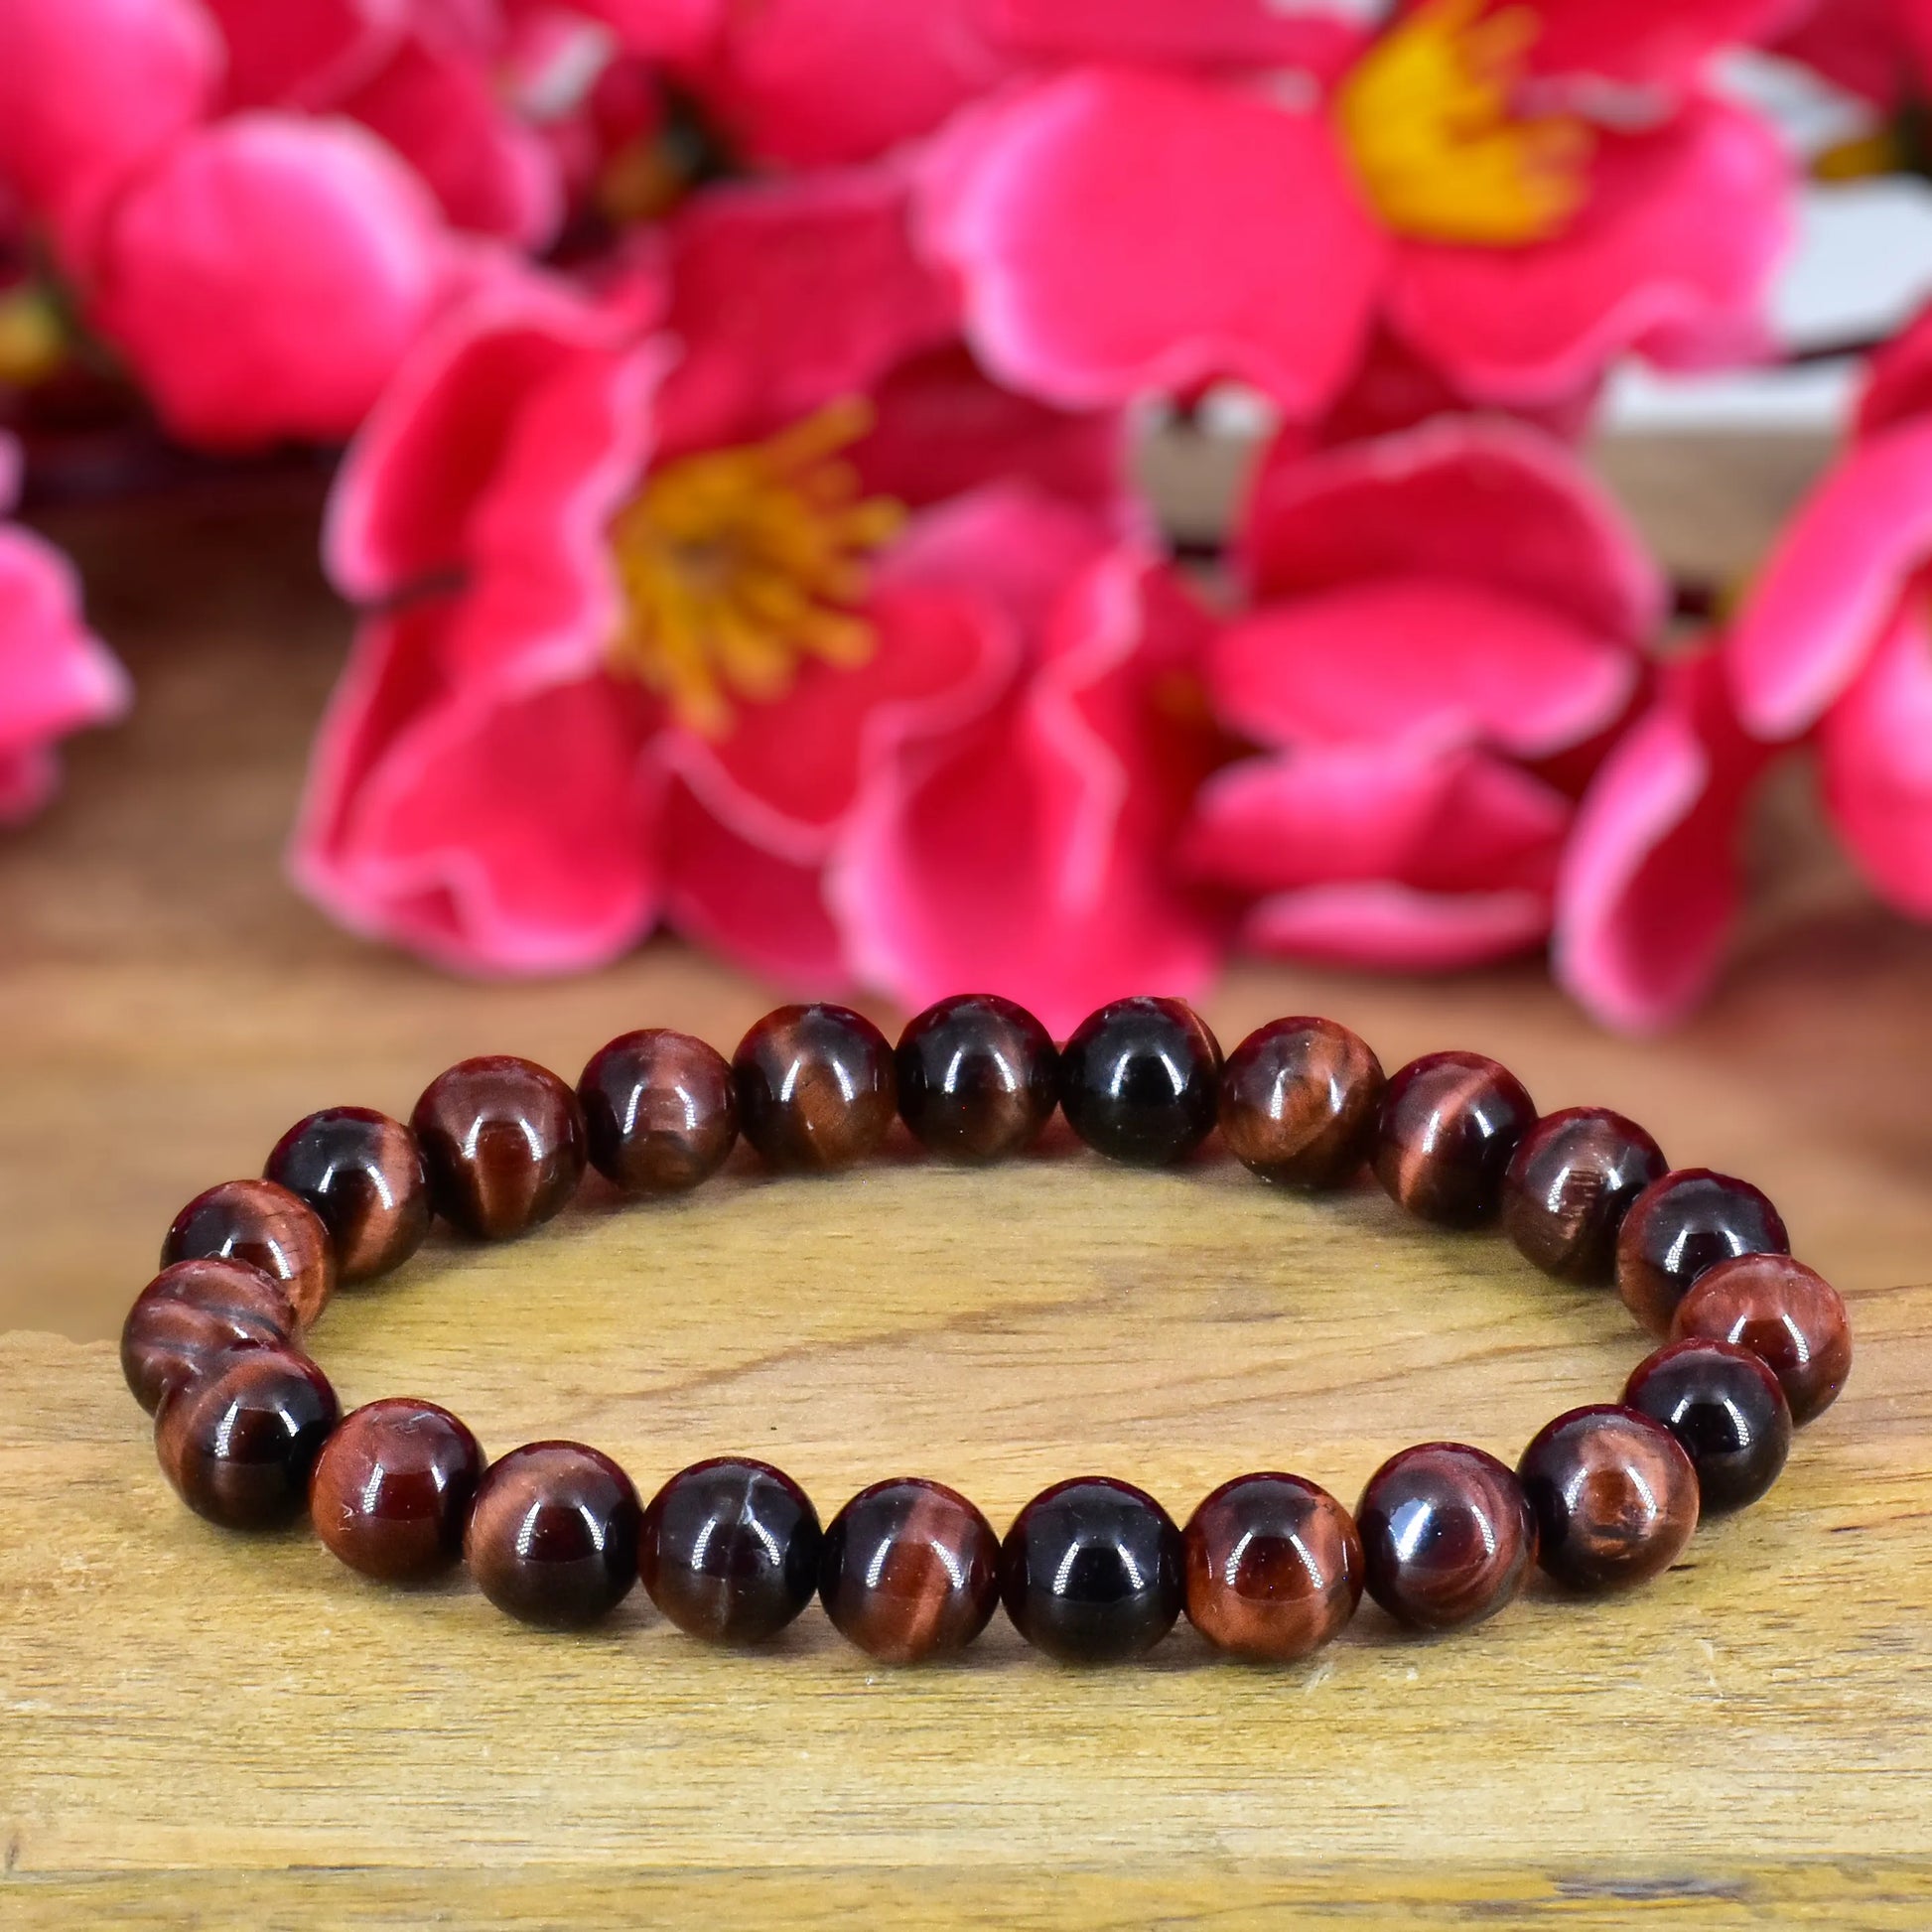 Red Tiger Eye Crystal Stone Bracelet for Confidence and Courage